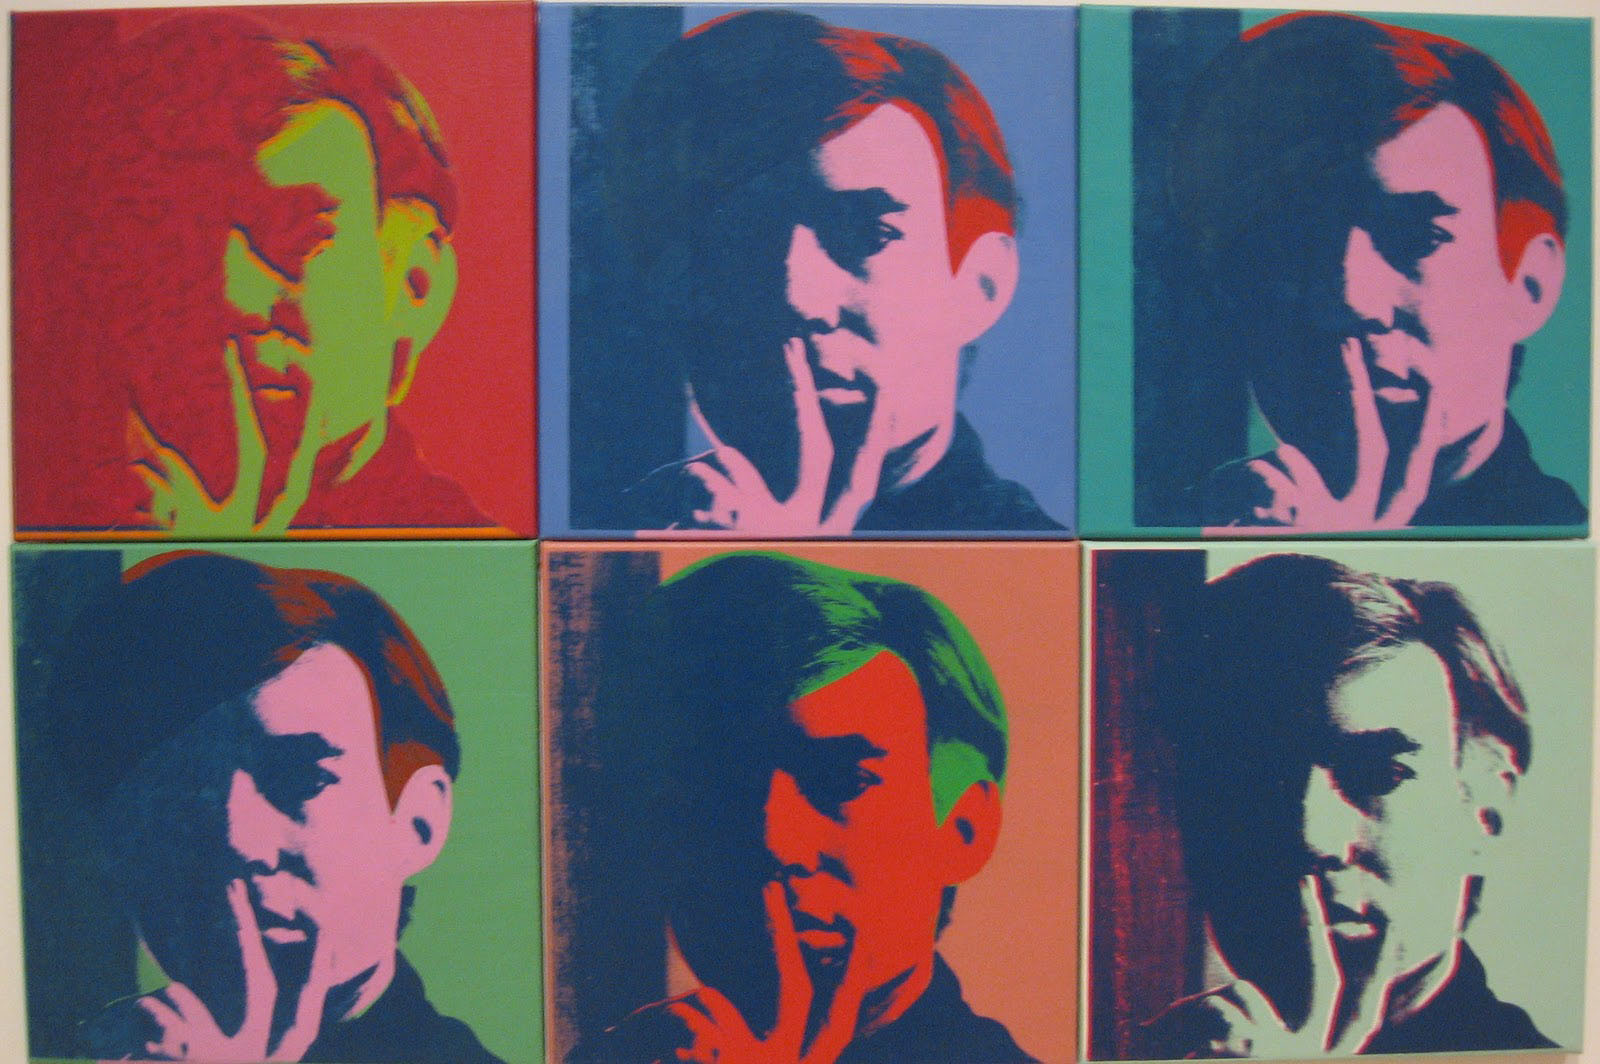 Jeffrey Vallance Presents A Seance with Andy Warhol